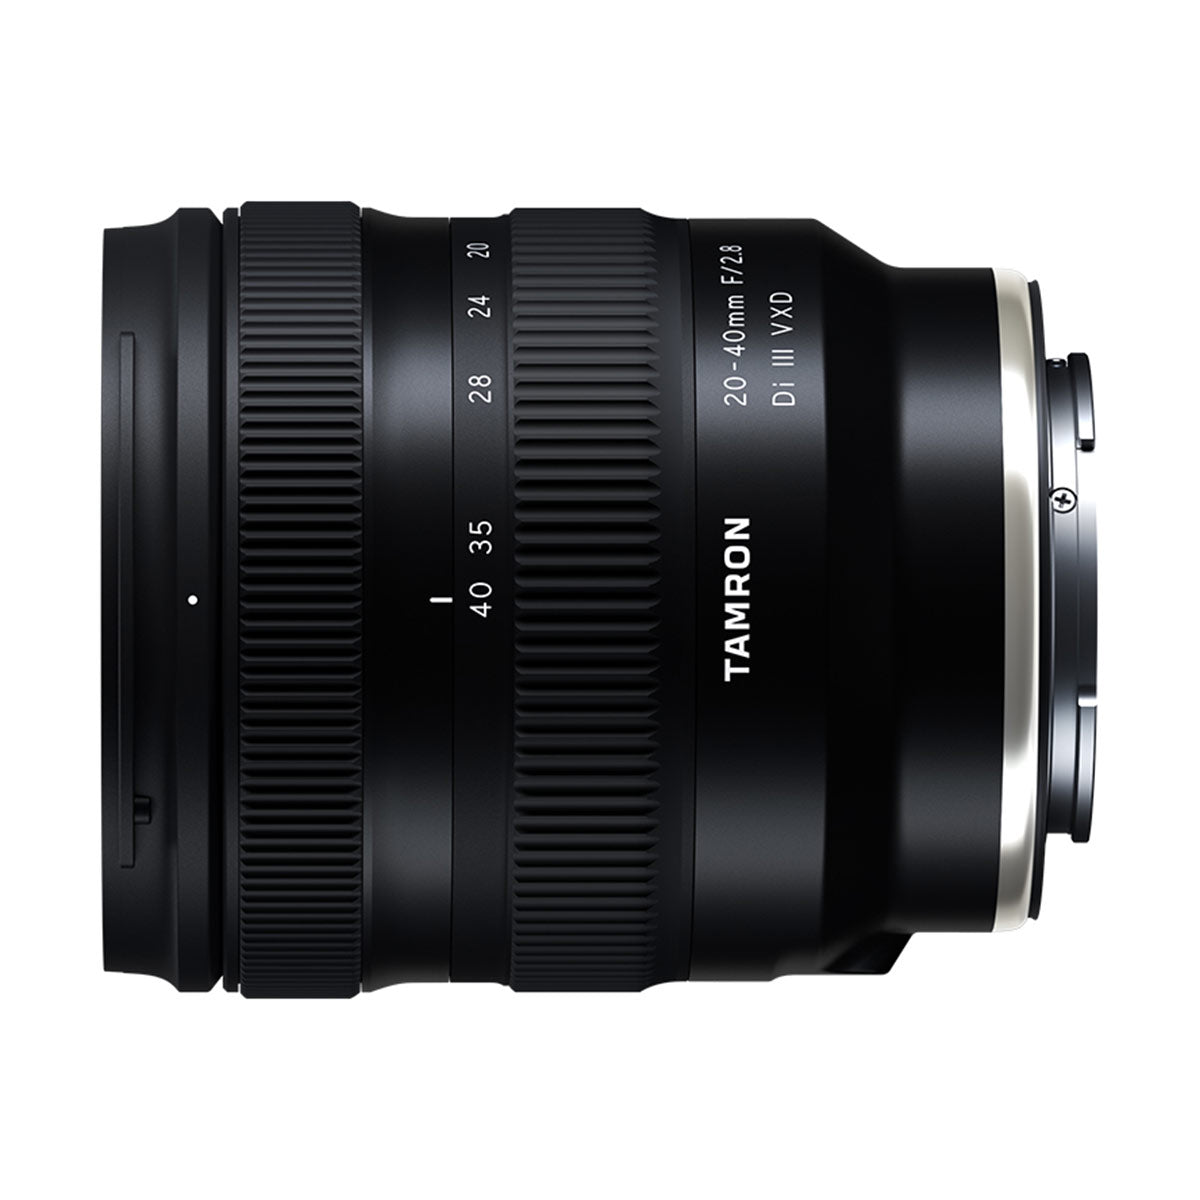 Tamron 20-40mm f/2.8 Di III VXD Lens for Sony FE